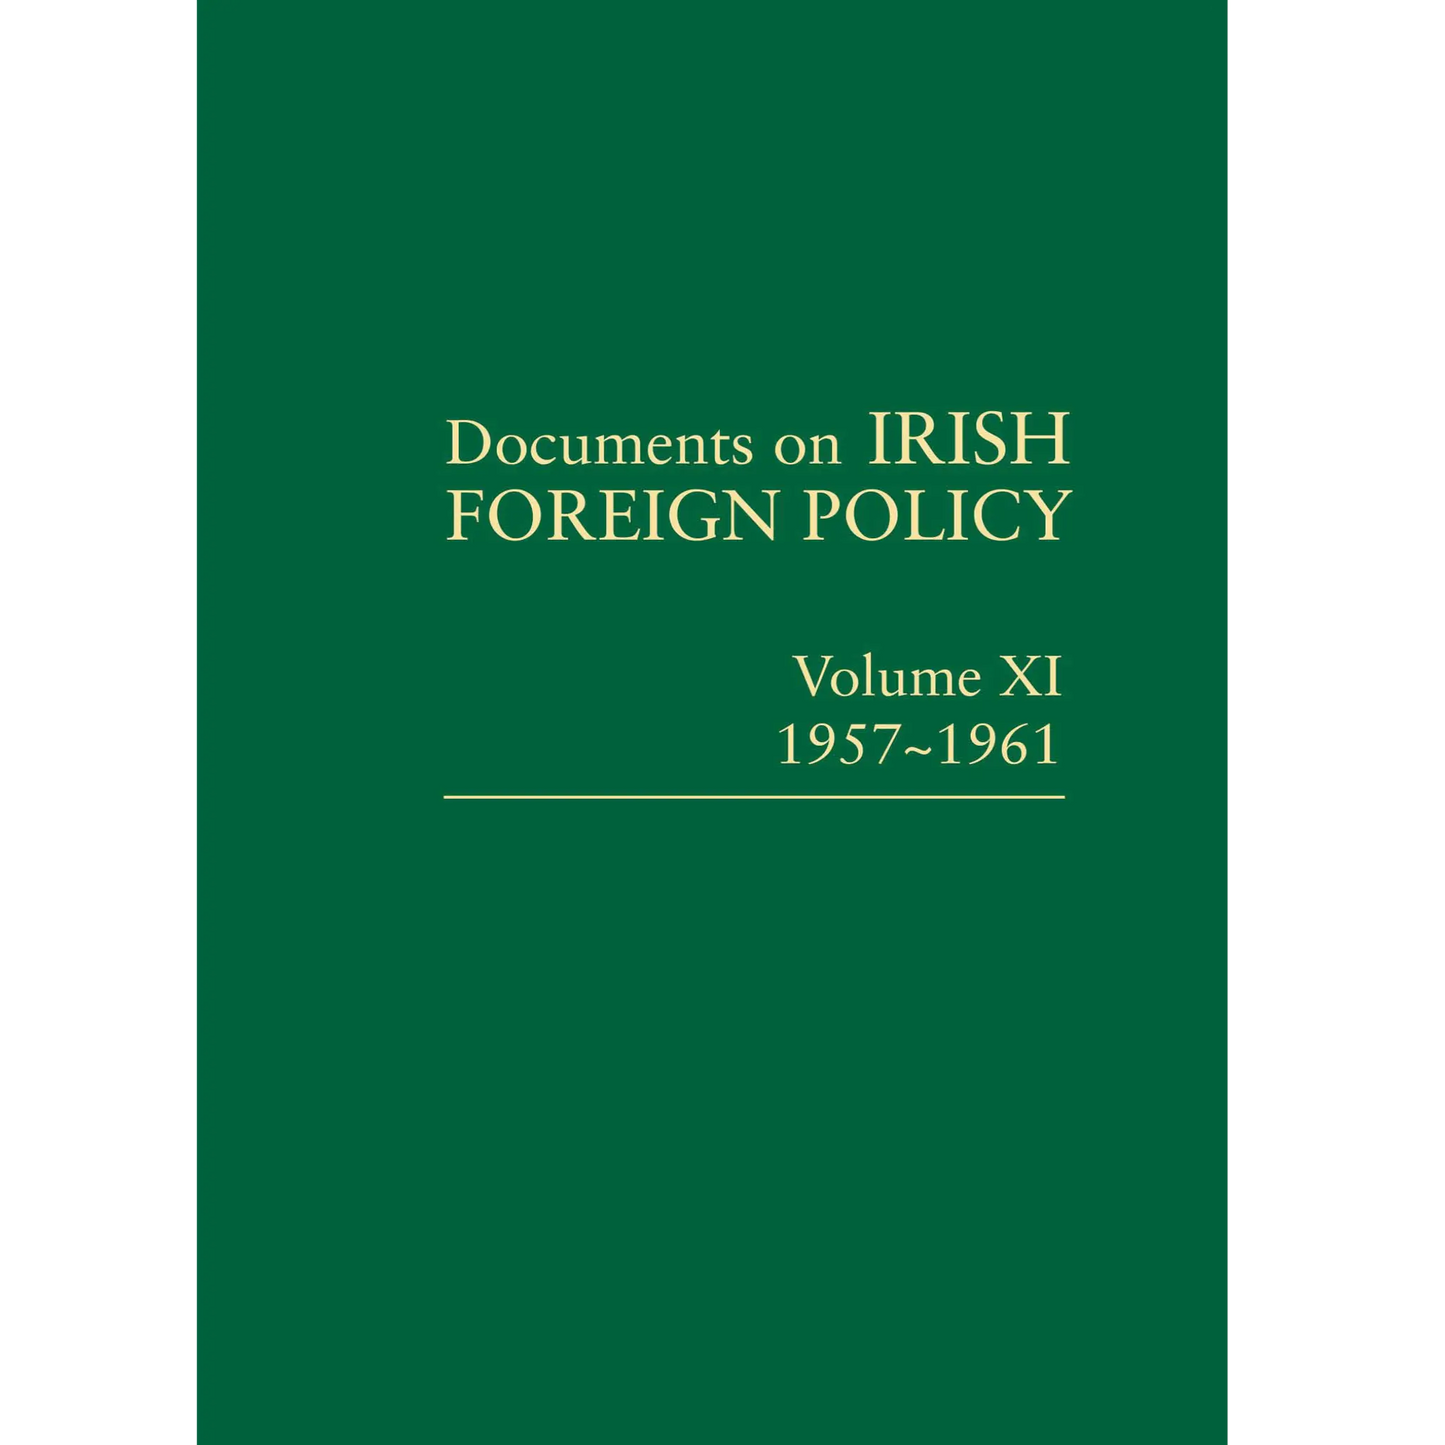 Documents on Irish Foreign Policy: v. 11: 1957-1961